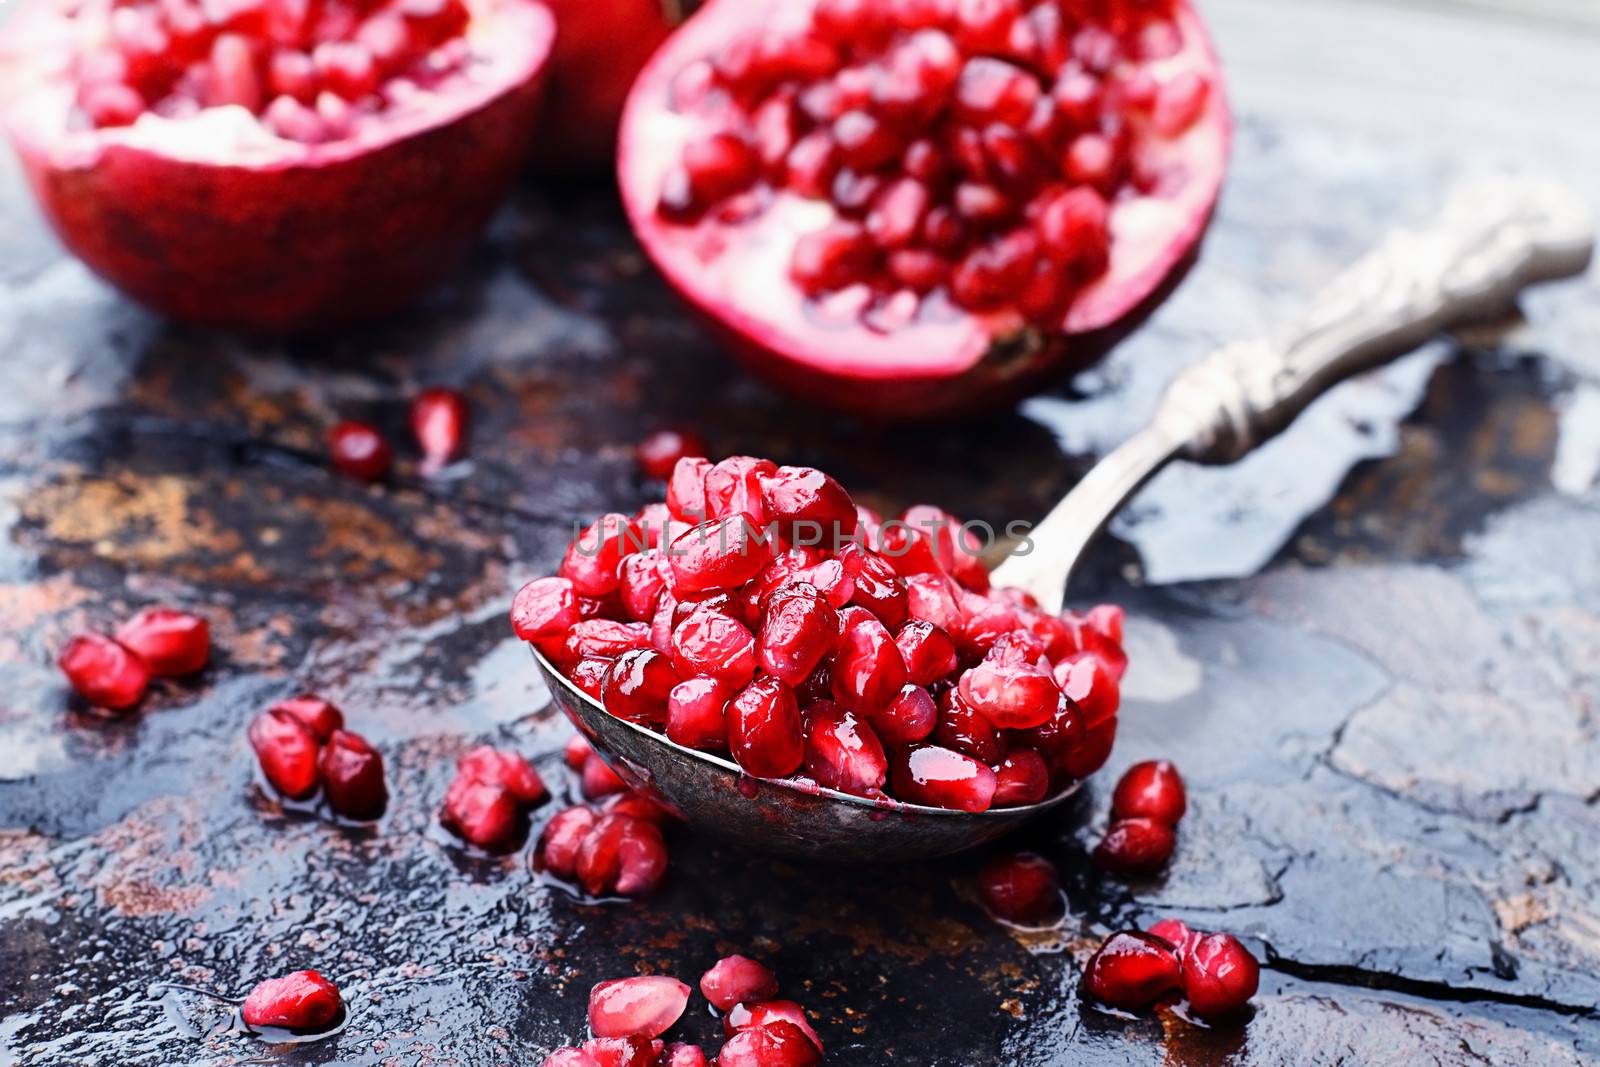 Pomegranate seeds in an antique silver spoon over a rustic background. 